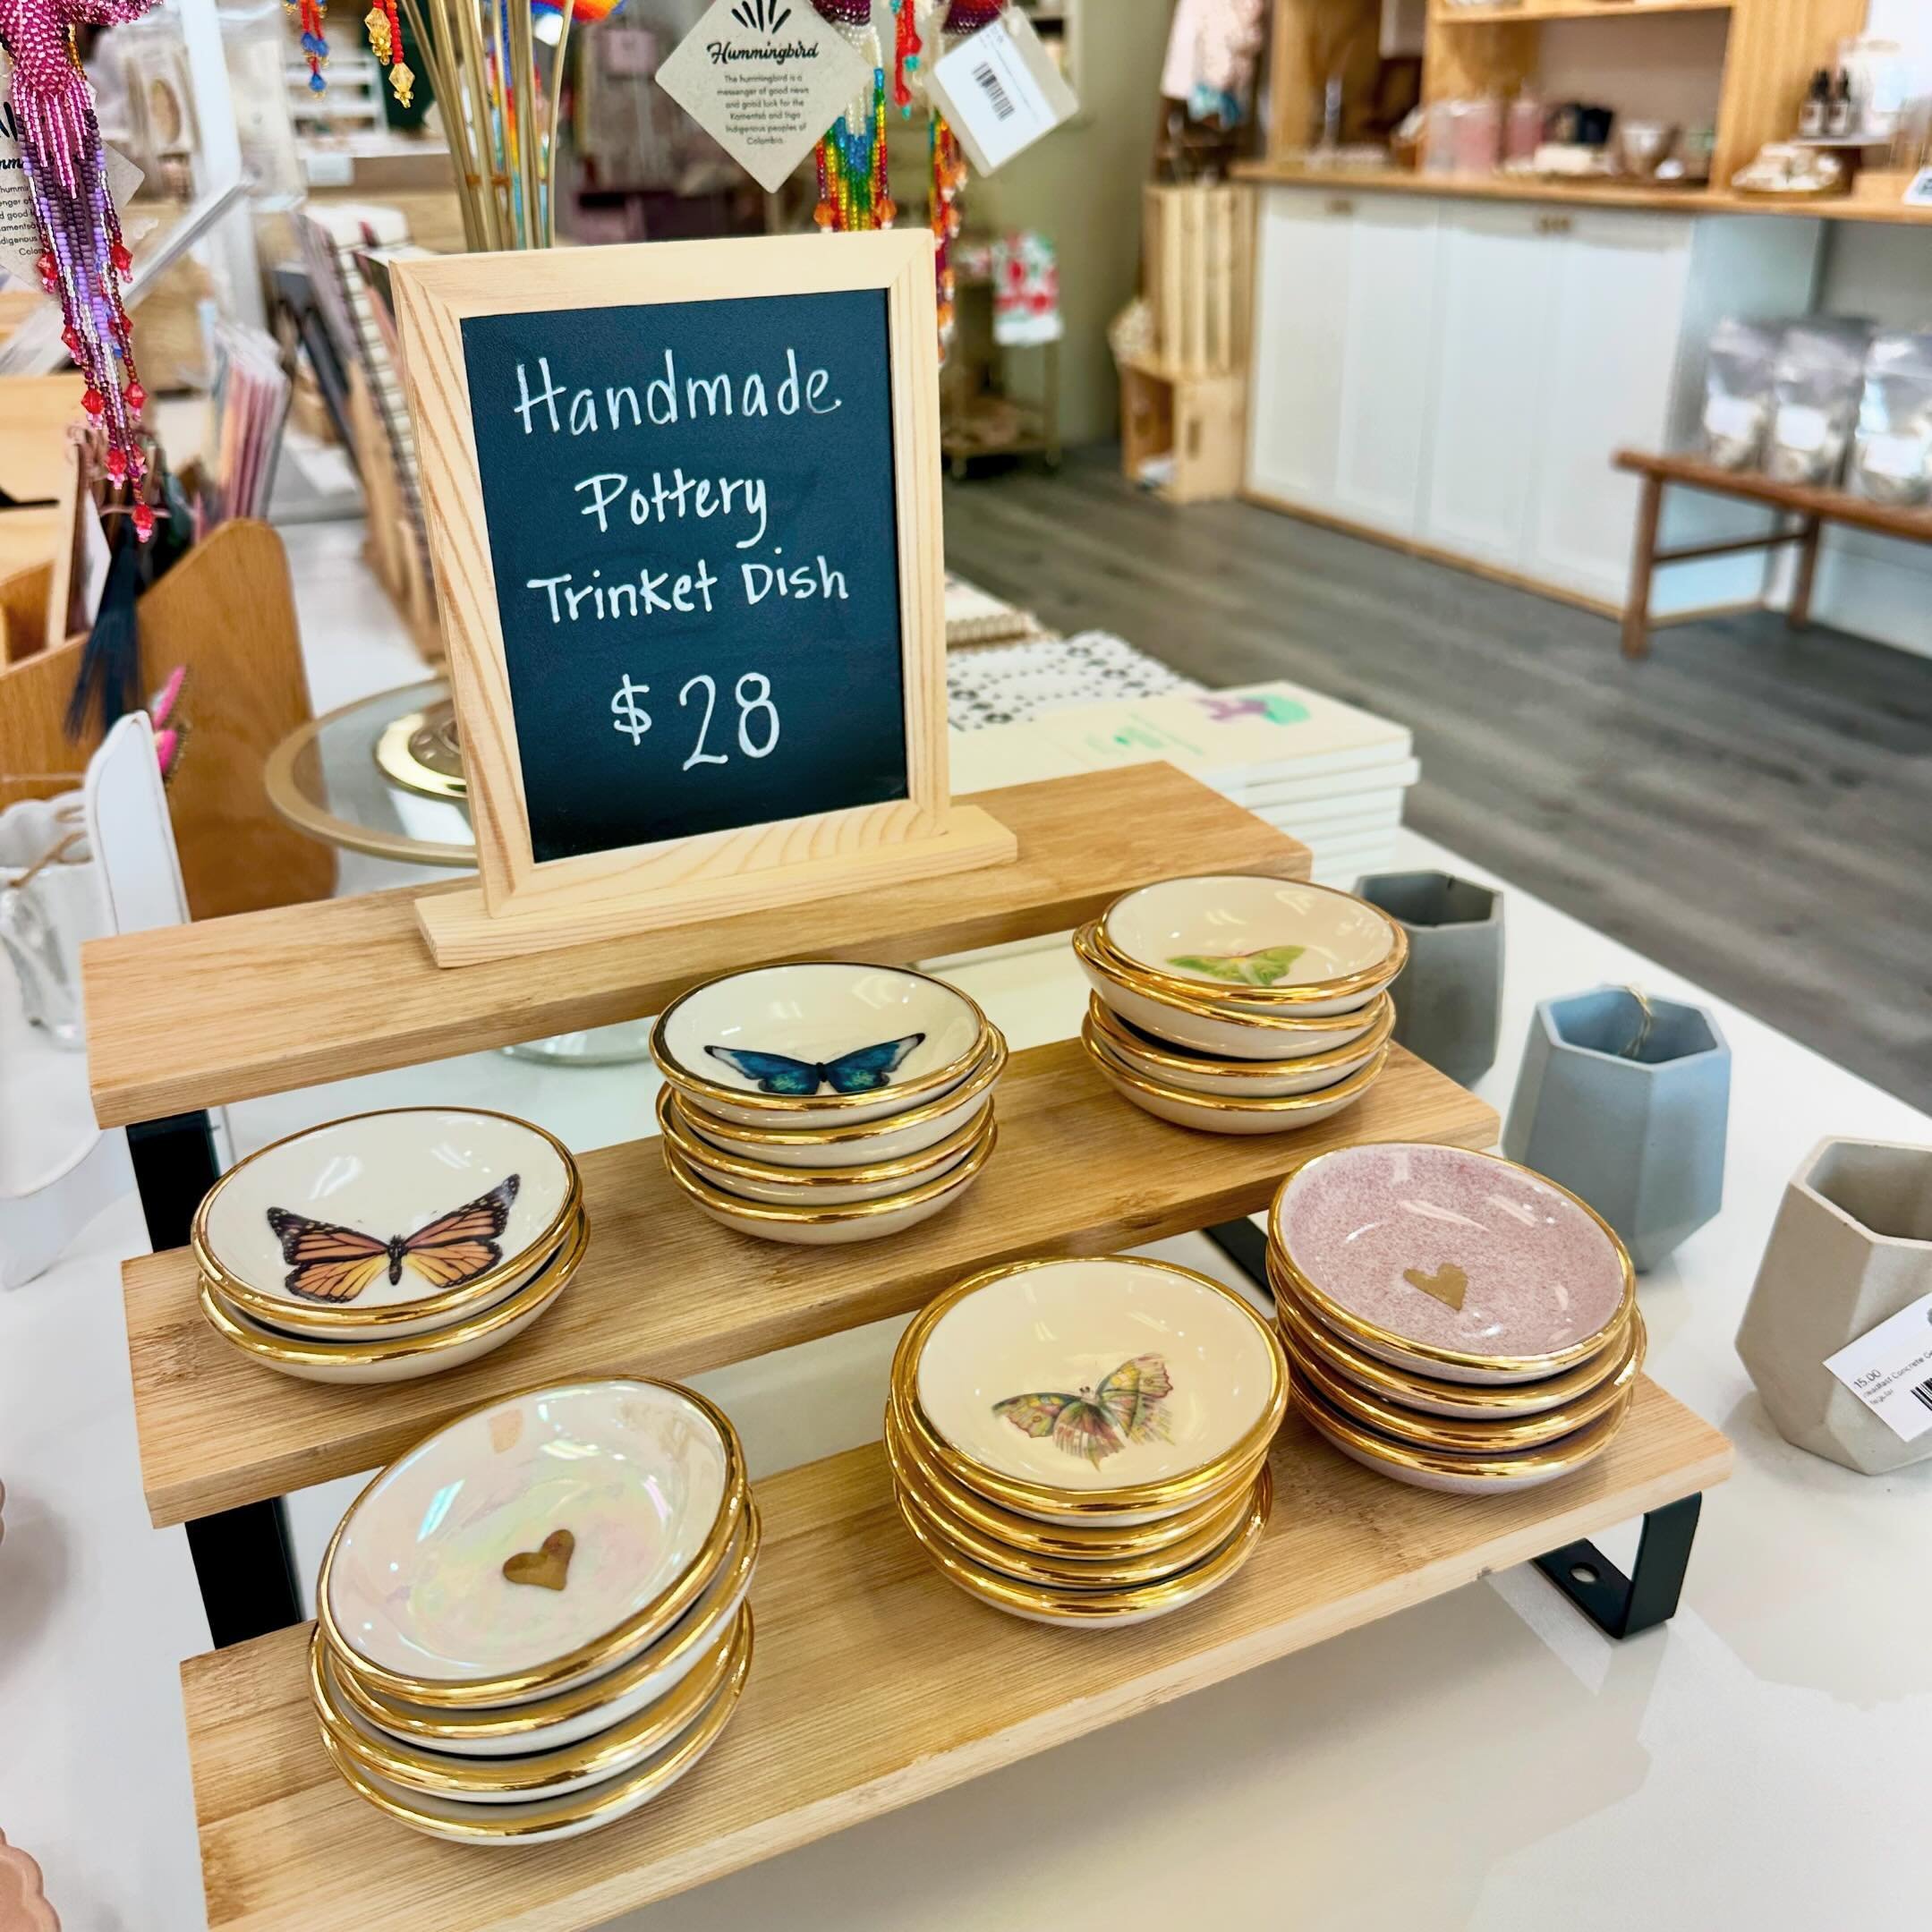 Current favorite product in the shop right now - these gorgeous handmade ceramic trinket dishes with 22K gold luster accents and romantic details 🦋 We love products that are both functional and beautiful! More new products hitting the shop and excit